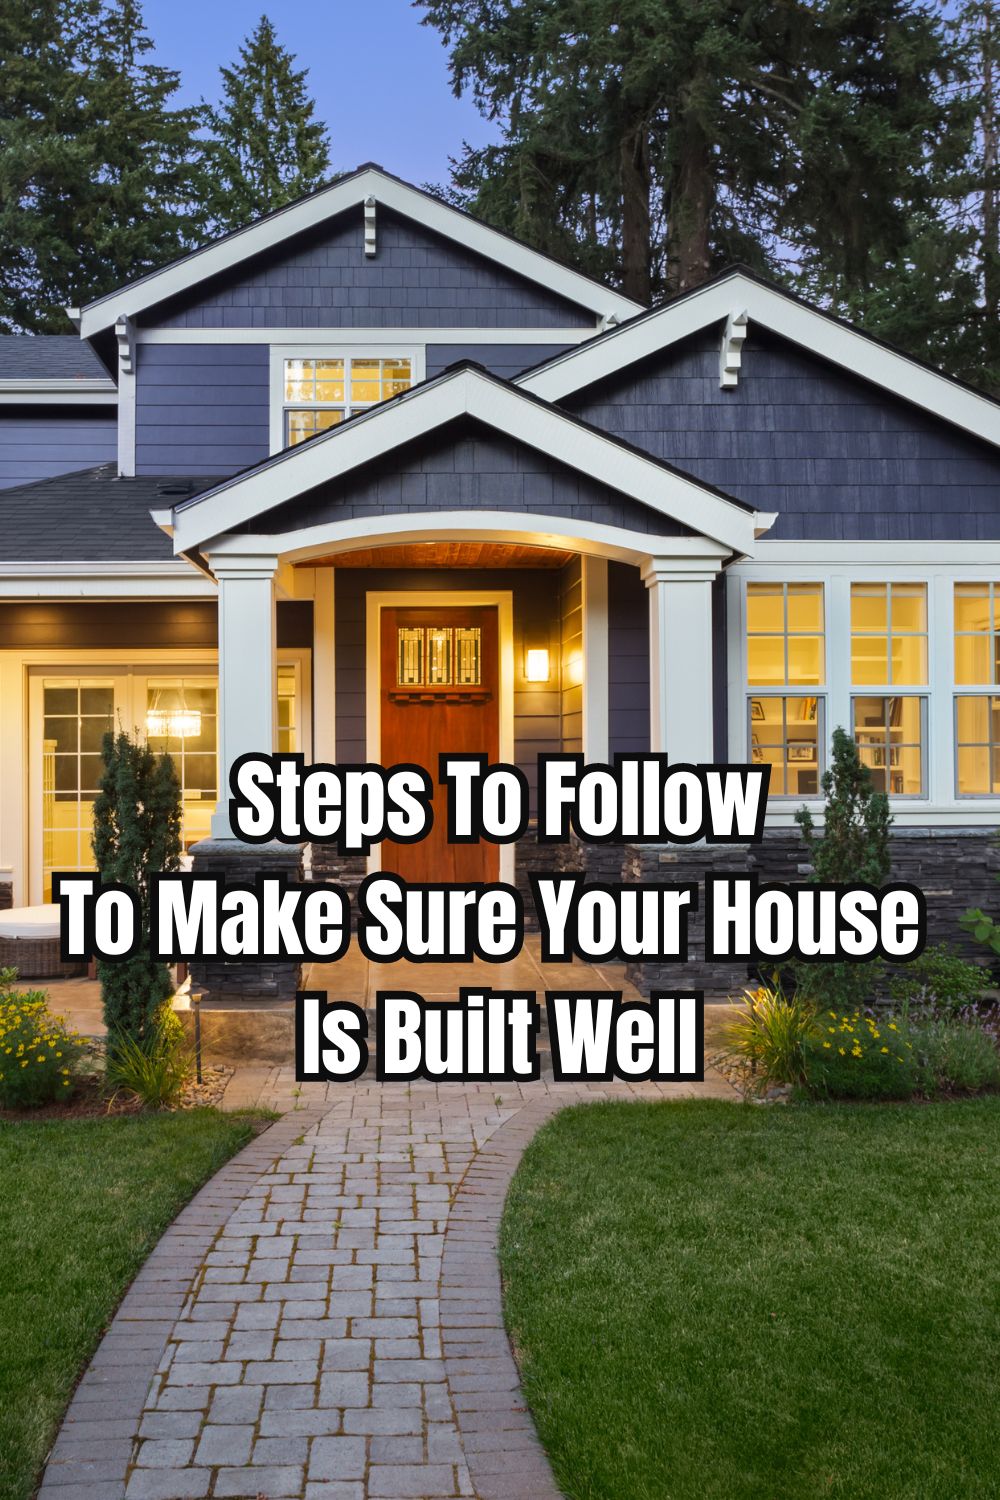 Steps To Follow To Make Sure Your House Is Built Well